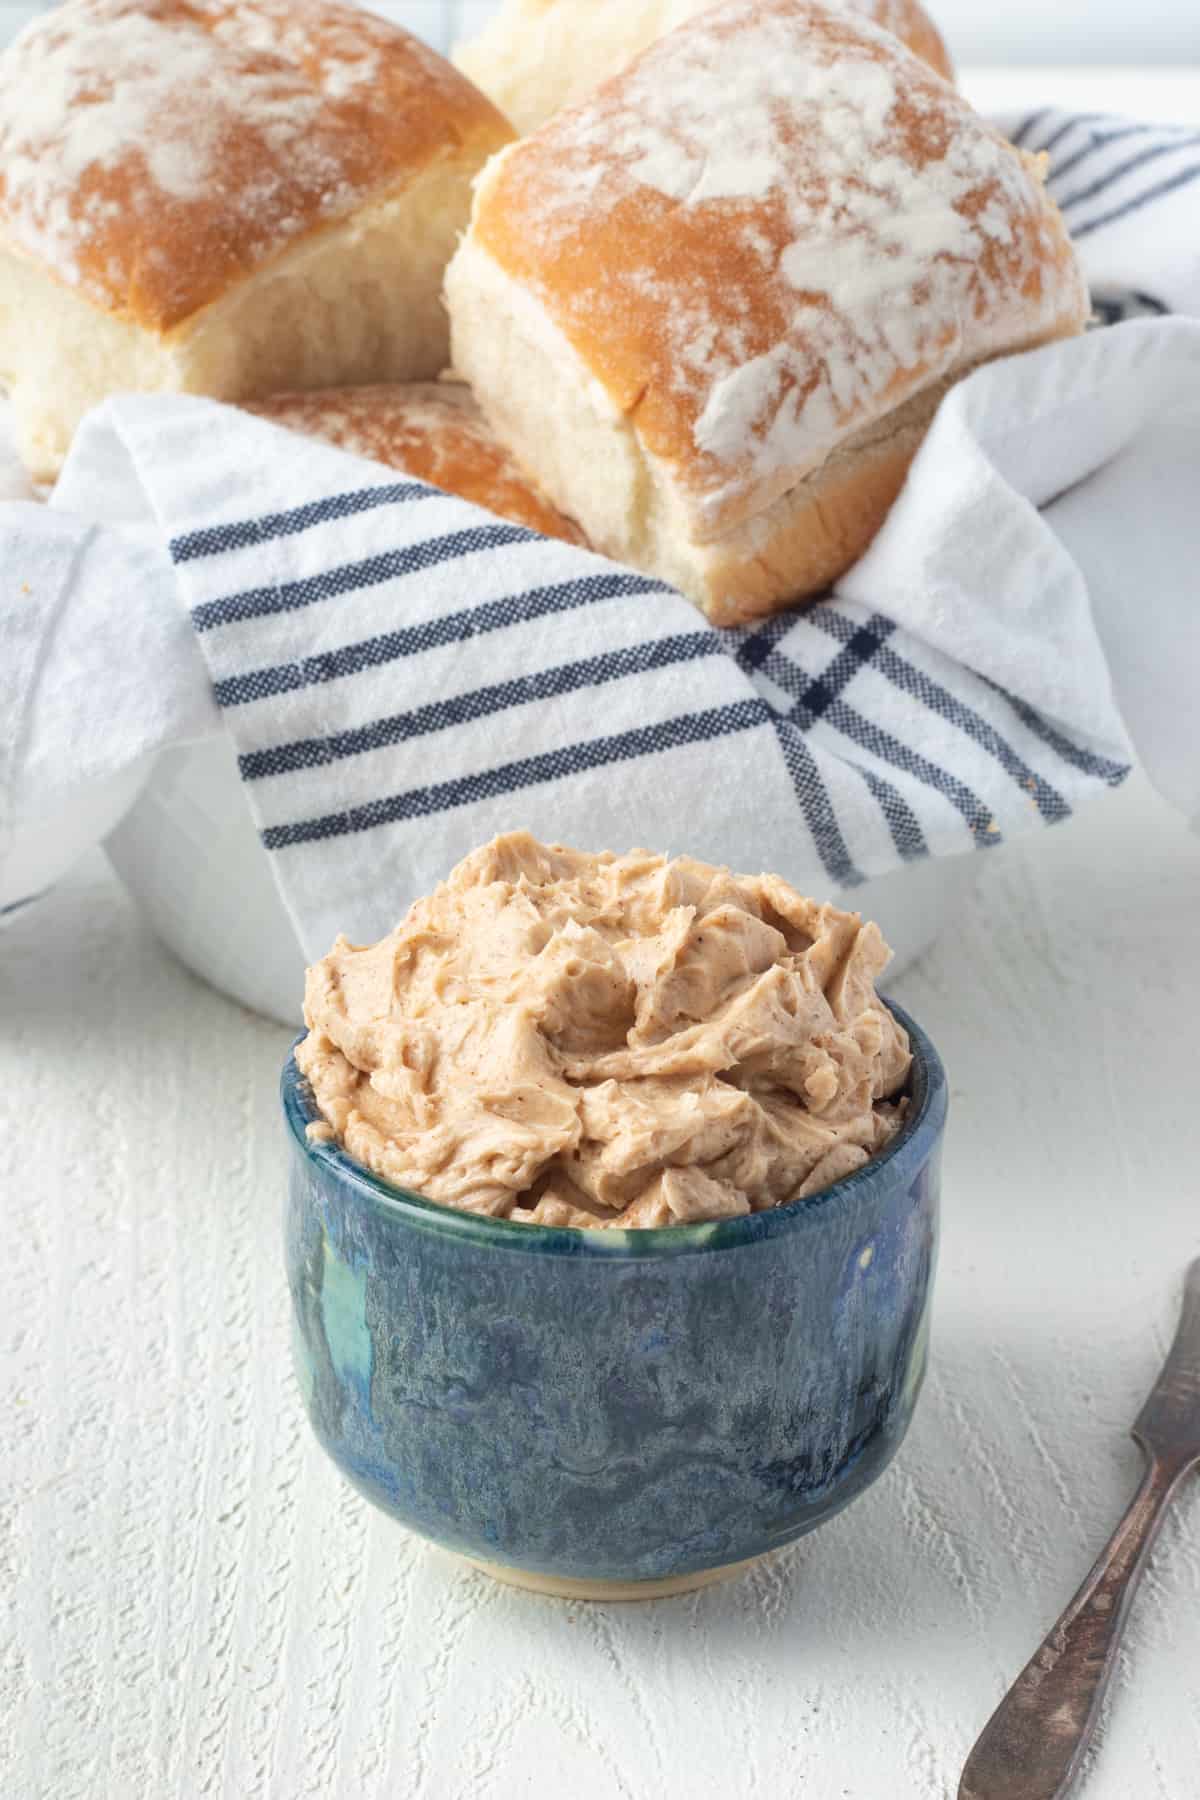 Homemade Cinnamon Honey Butter - Oh My Food Recipes